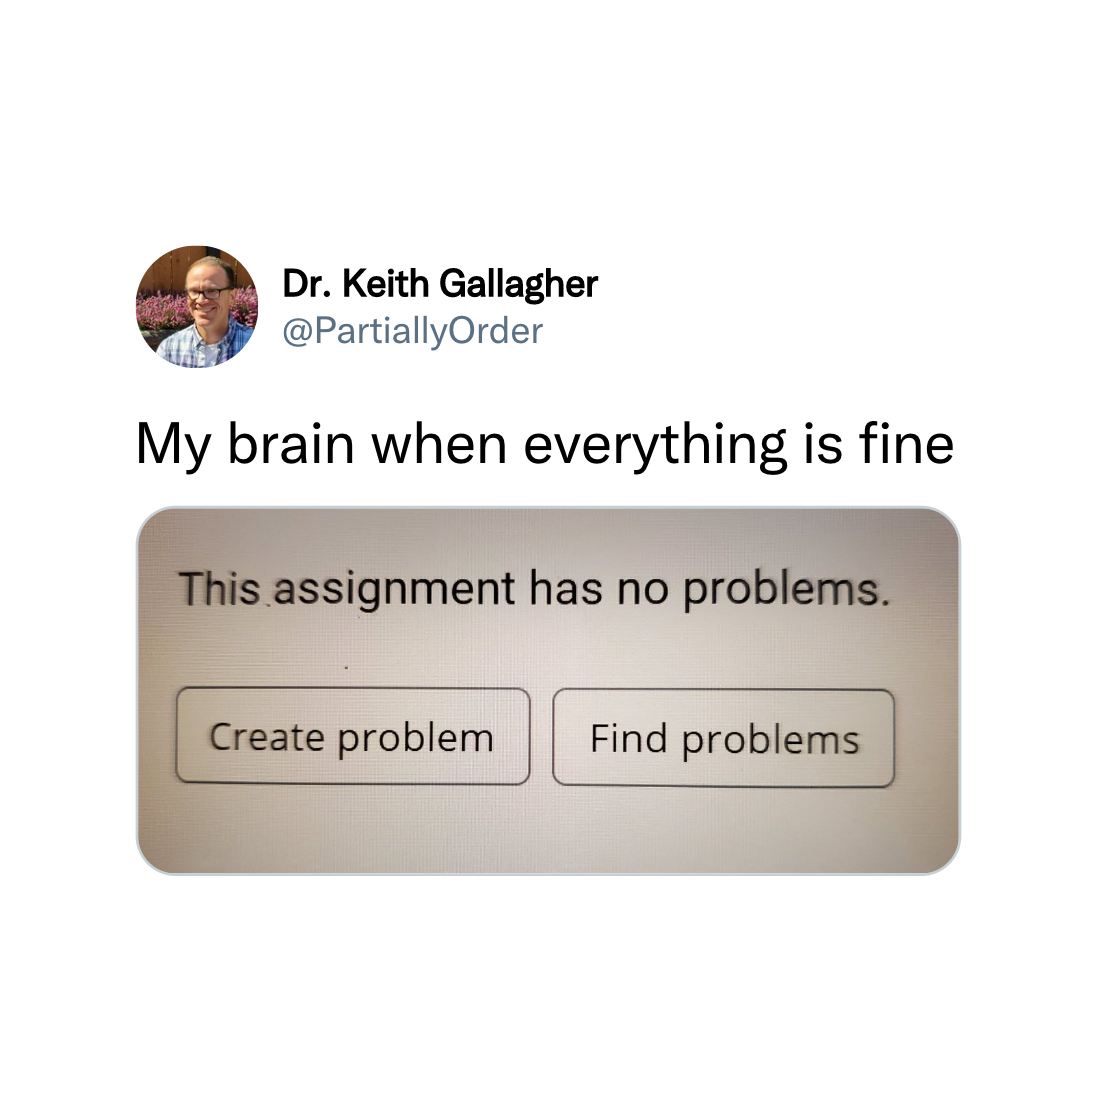 funny tweets - Dr. Keith Gallagher My brain when everything is fine This assignment has no problems. Create problem Find problems